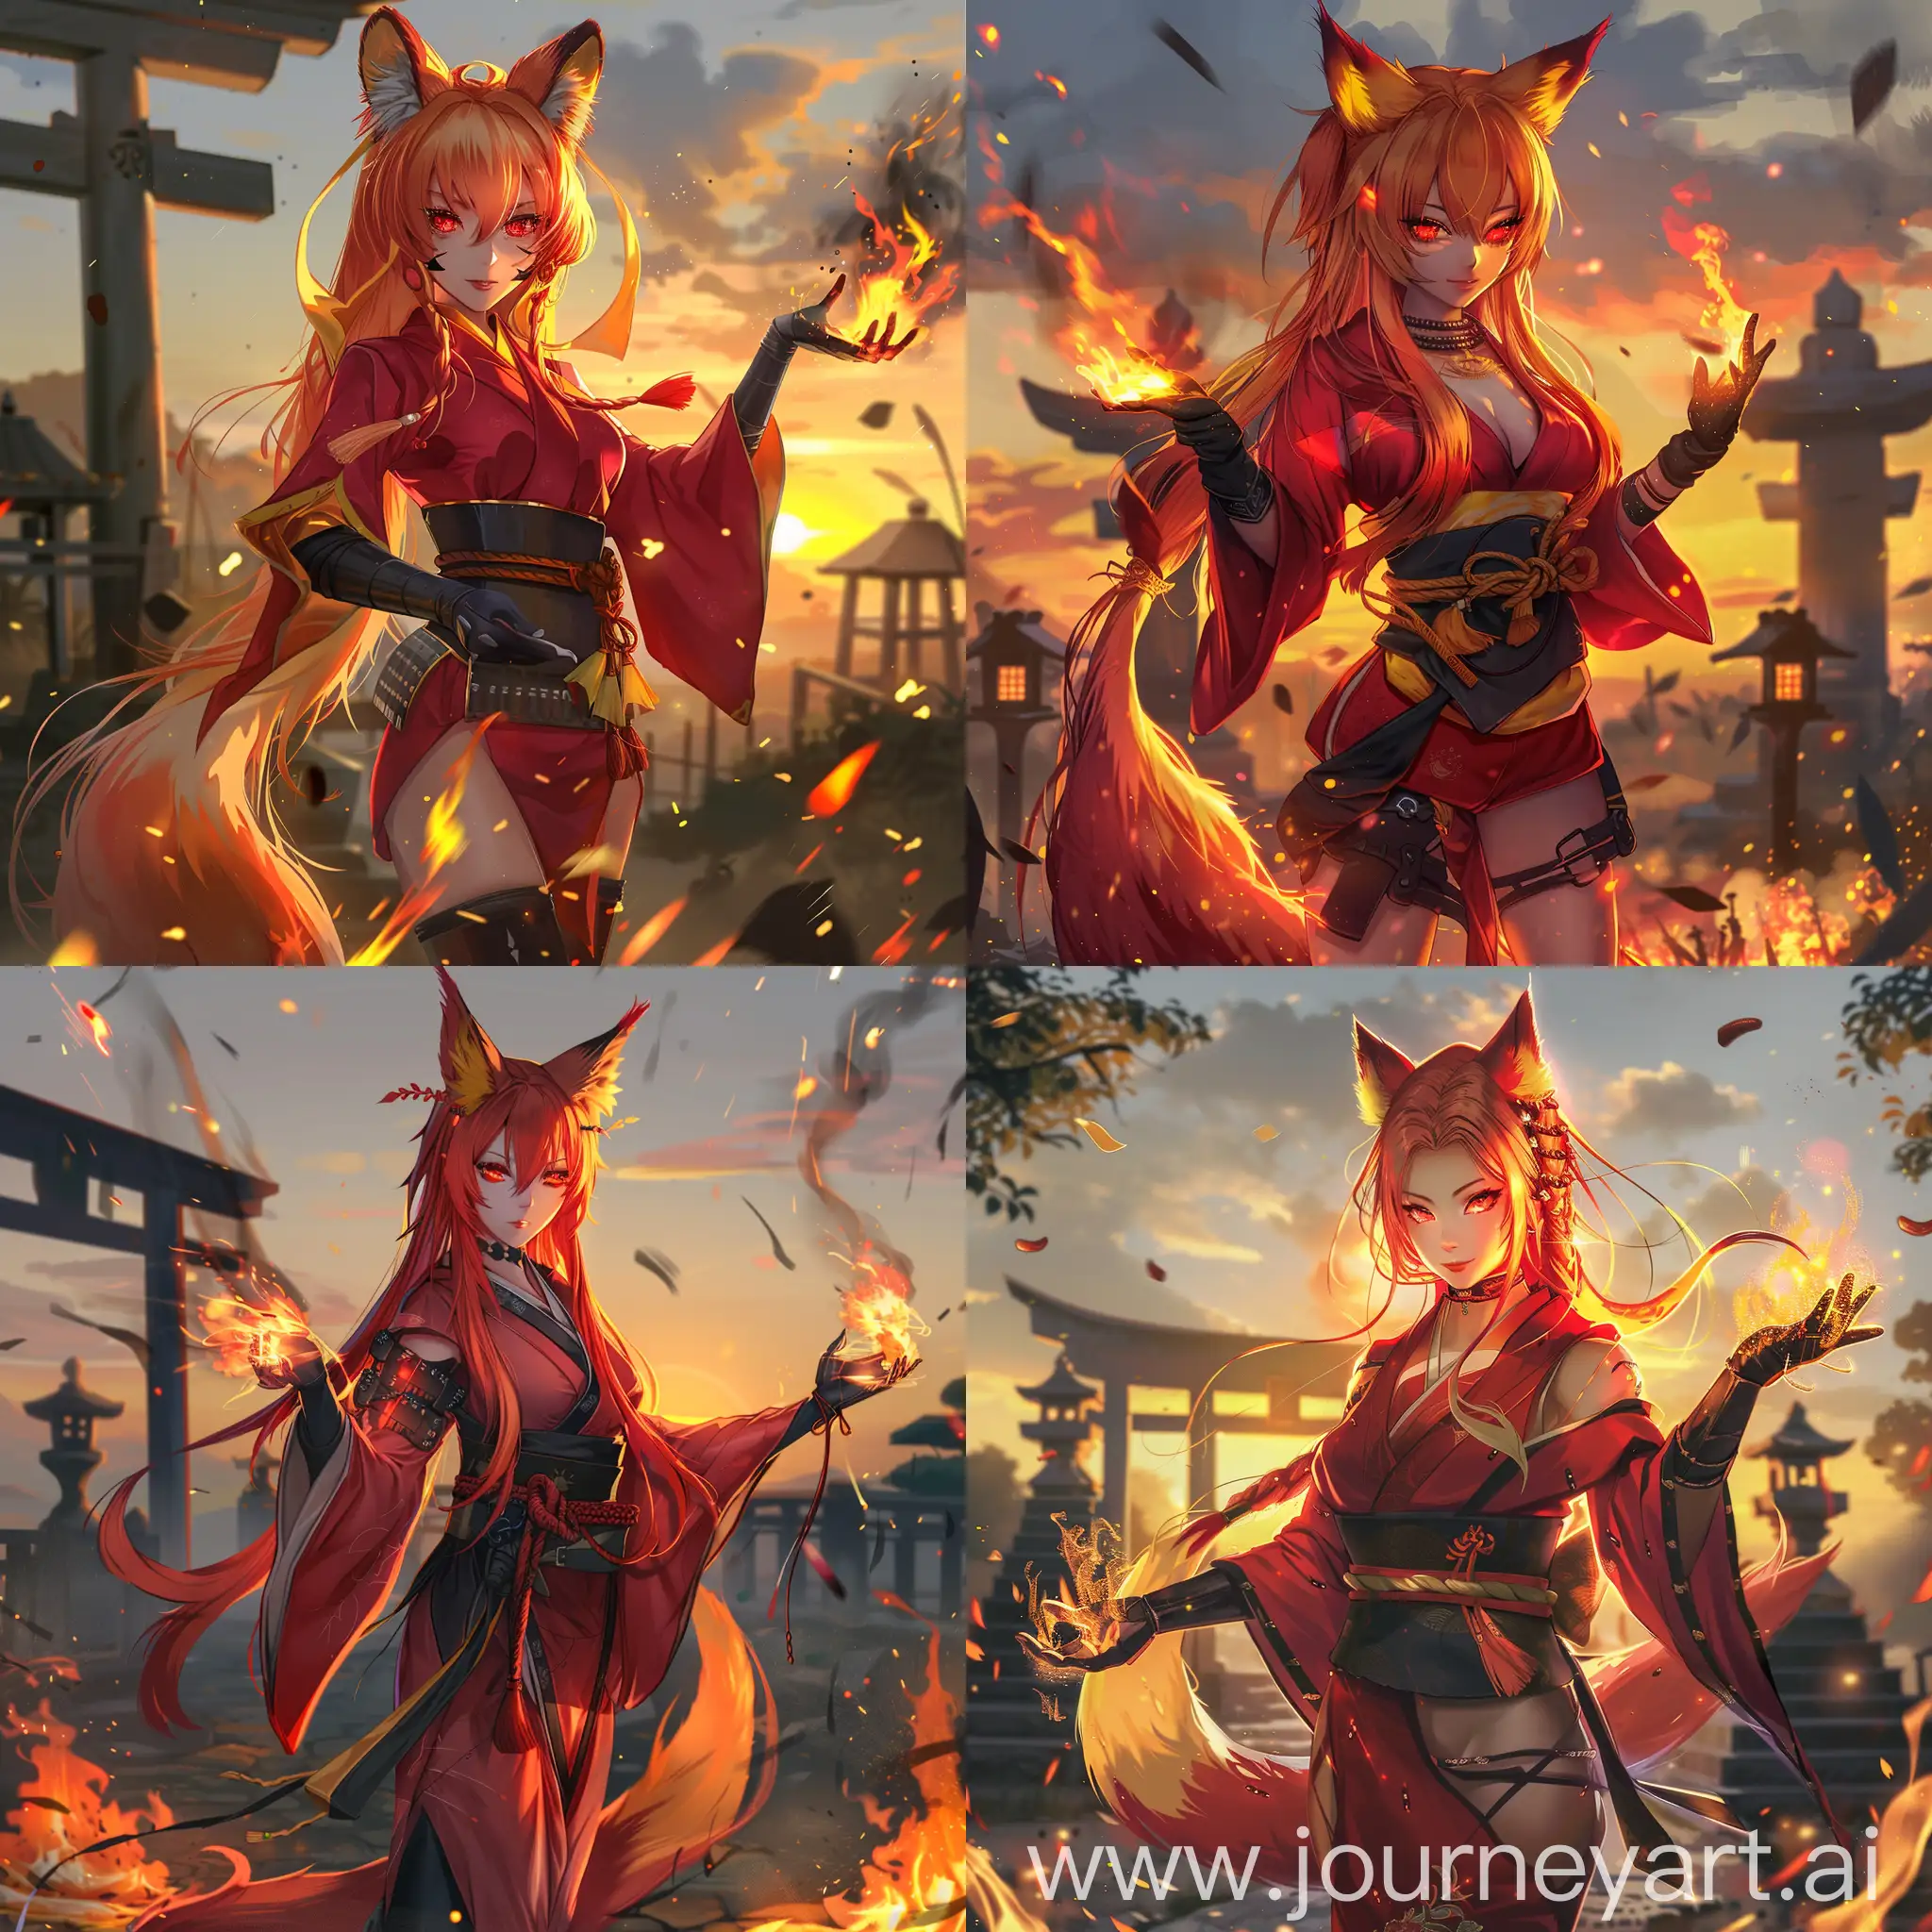 Fiery-Anime-Woman-Casting-Fire-Magic-at-Shinto-Shrine-during-Sunset